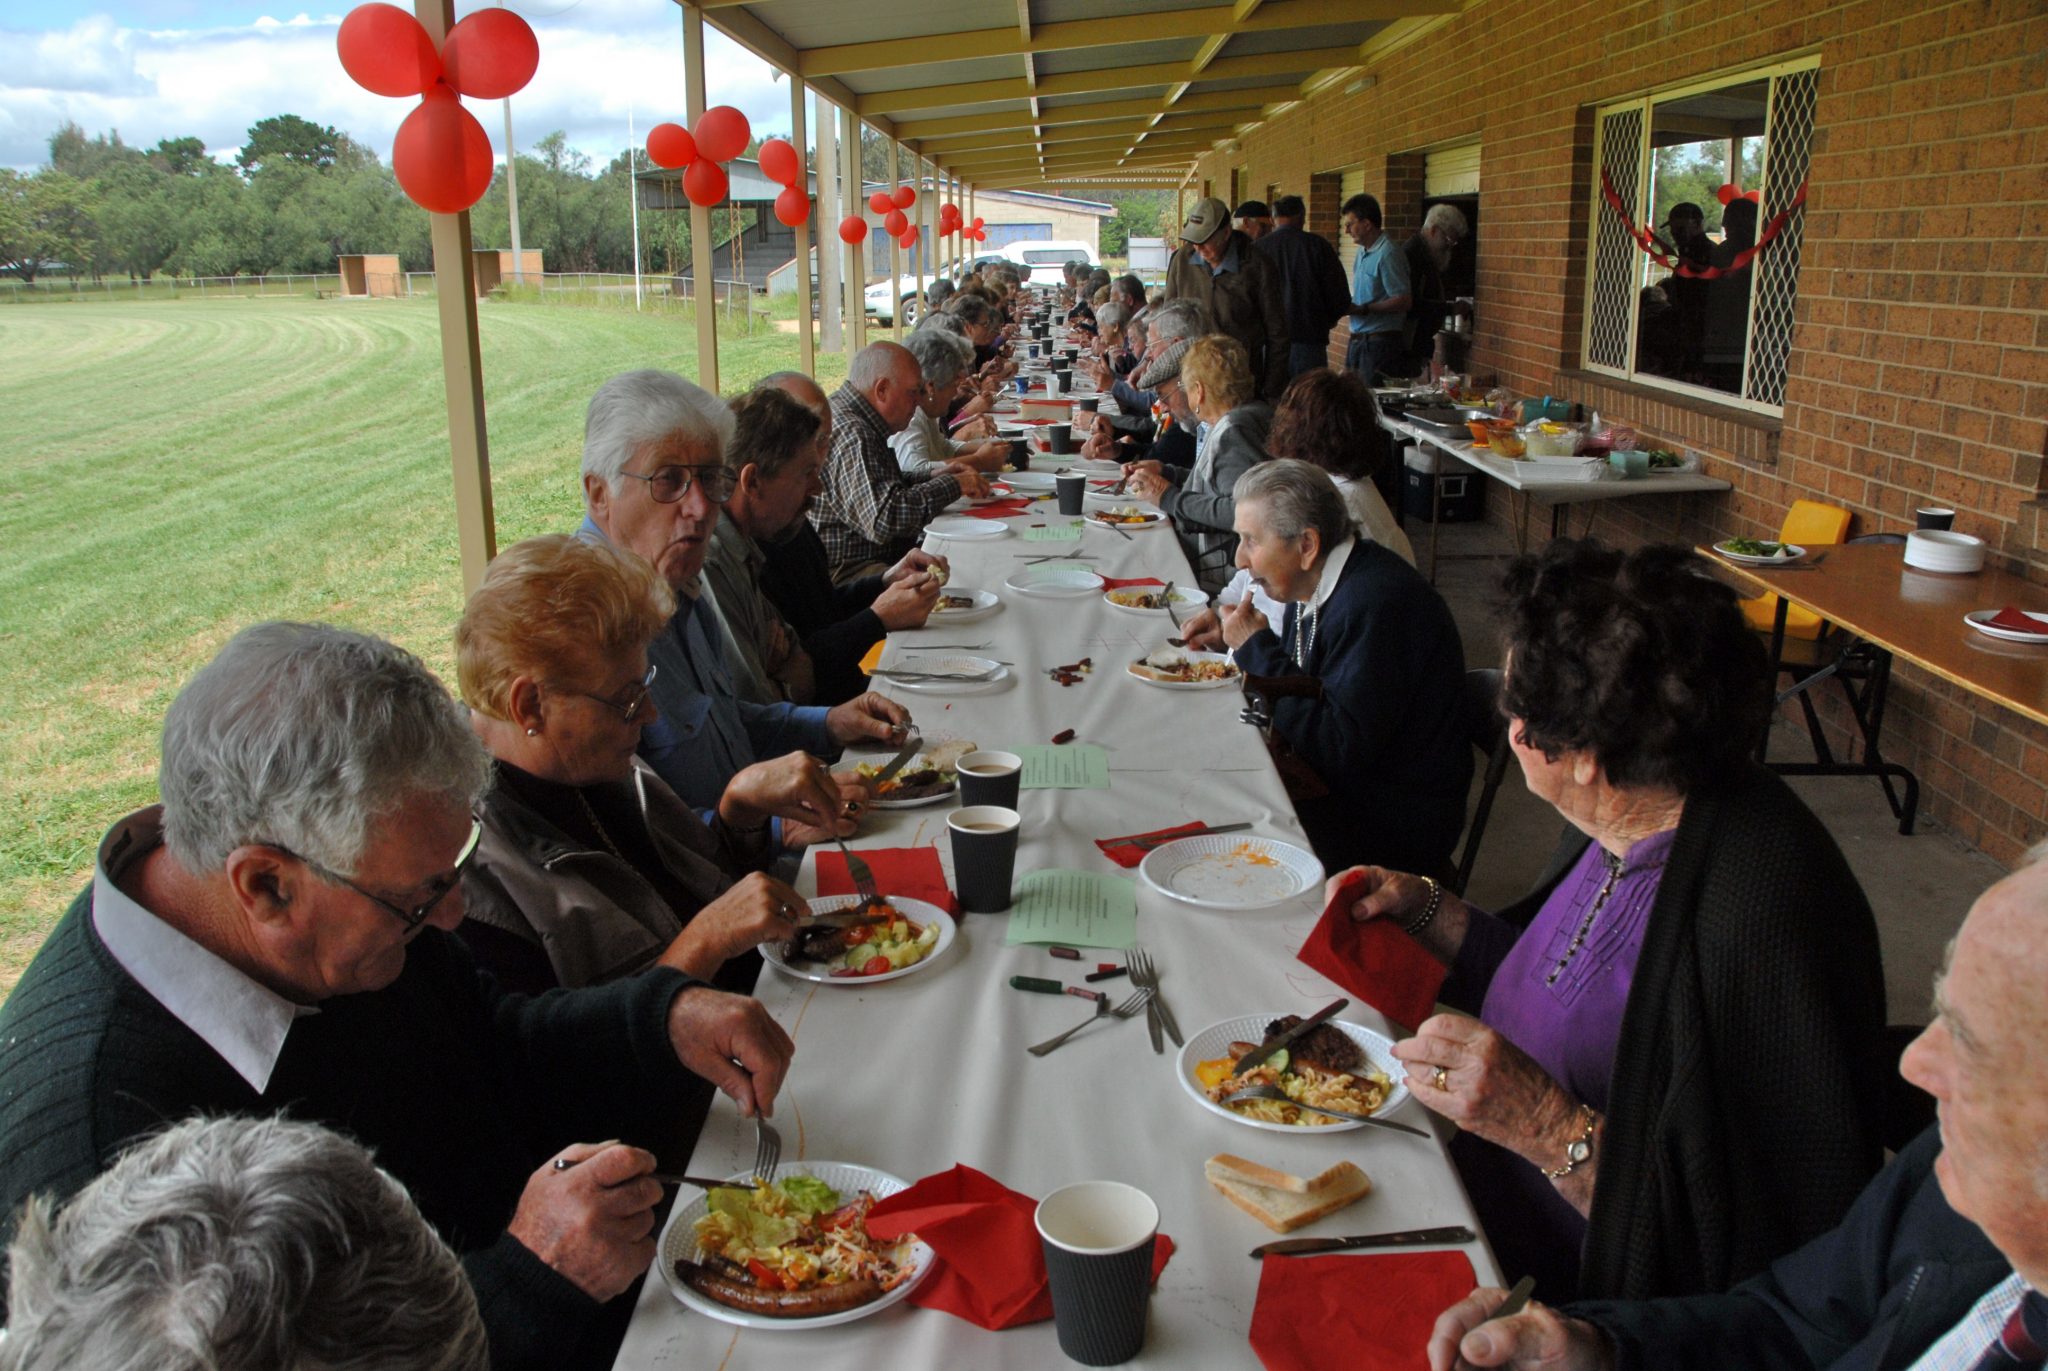 42179.-301011.Culcairn Andrew Hoy Pavilion. Longest Lutheran Lunch.At tables.